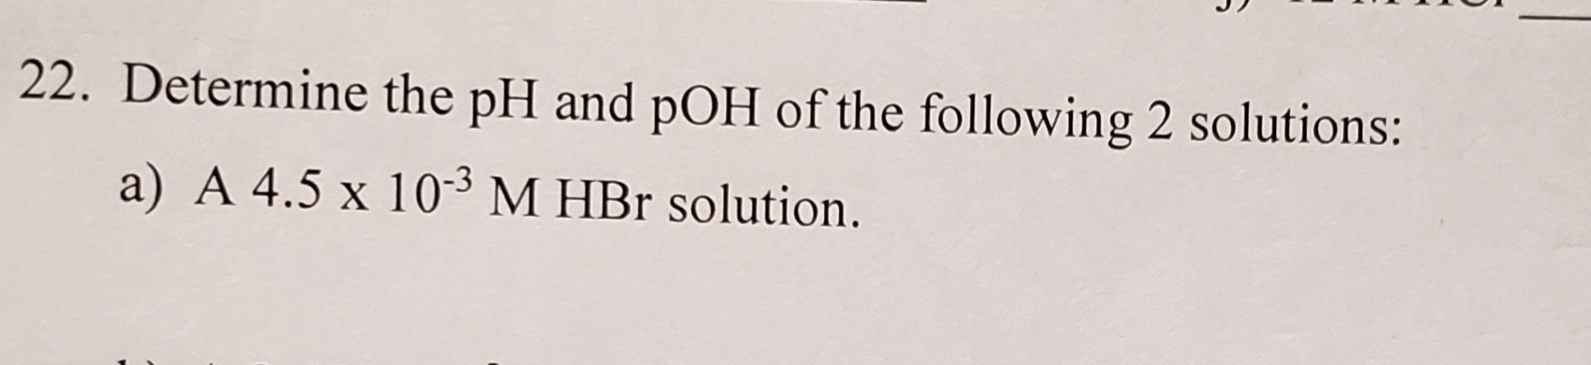 22. Determine the pH and pOH of the following 2 solutions:
a) A 4.5 x 103 M HBr solution.
